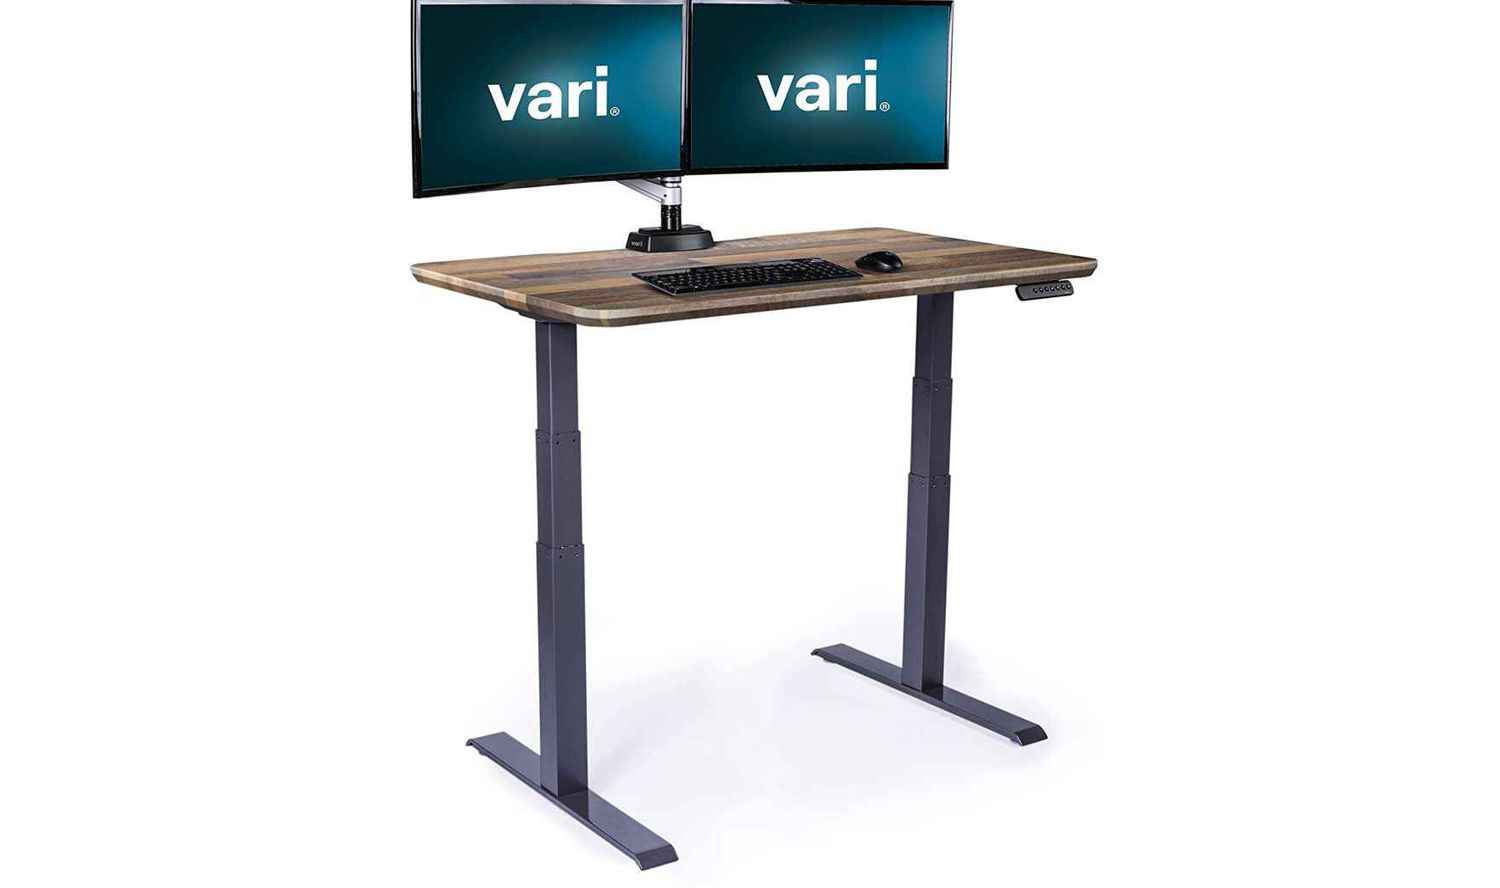 The NetDigz Editors rate the Vari Electric as the Best Premium Standing Desk.